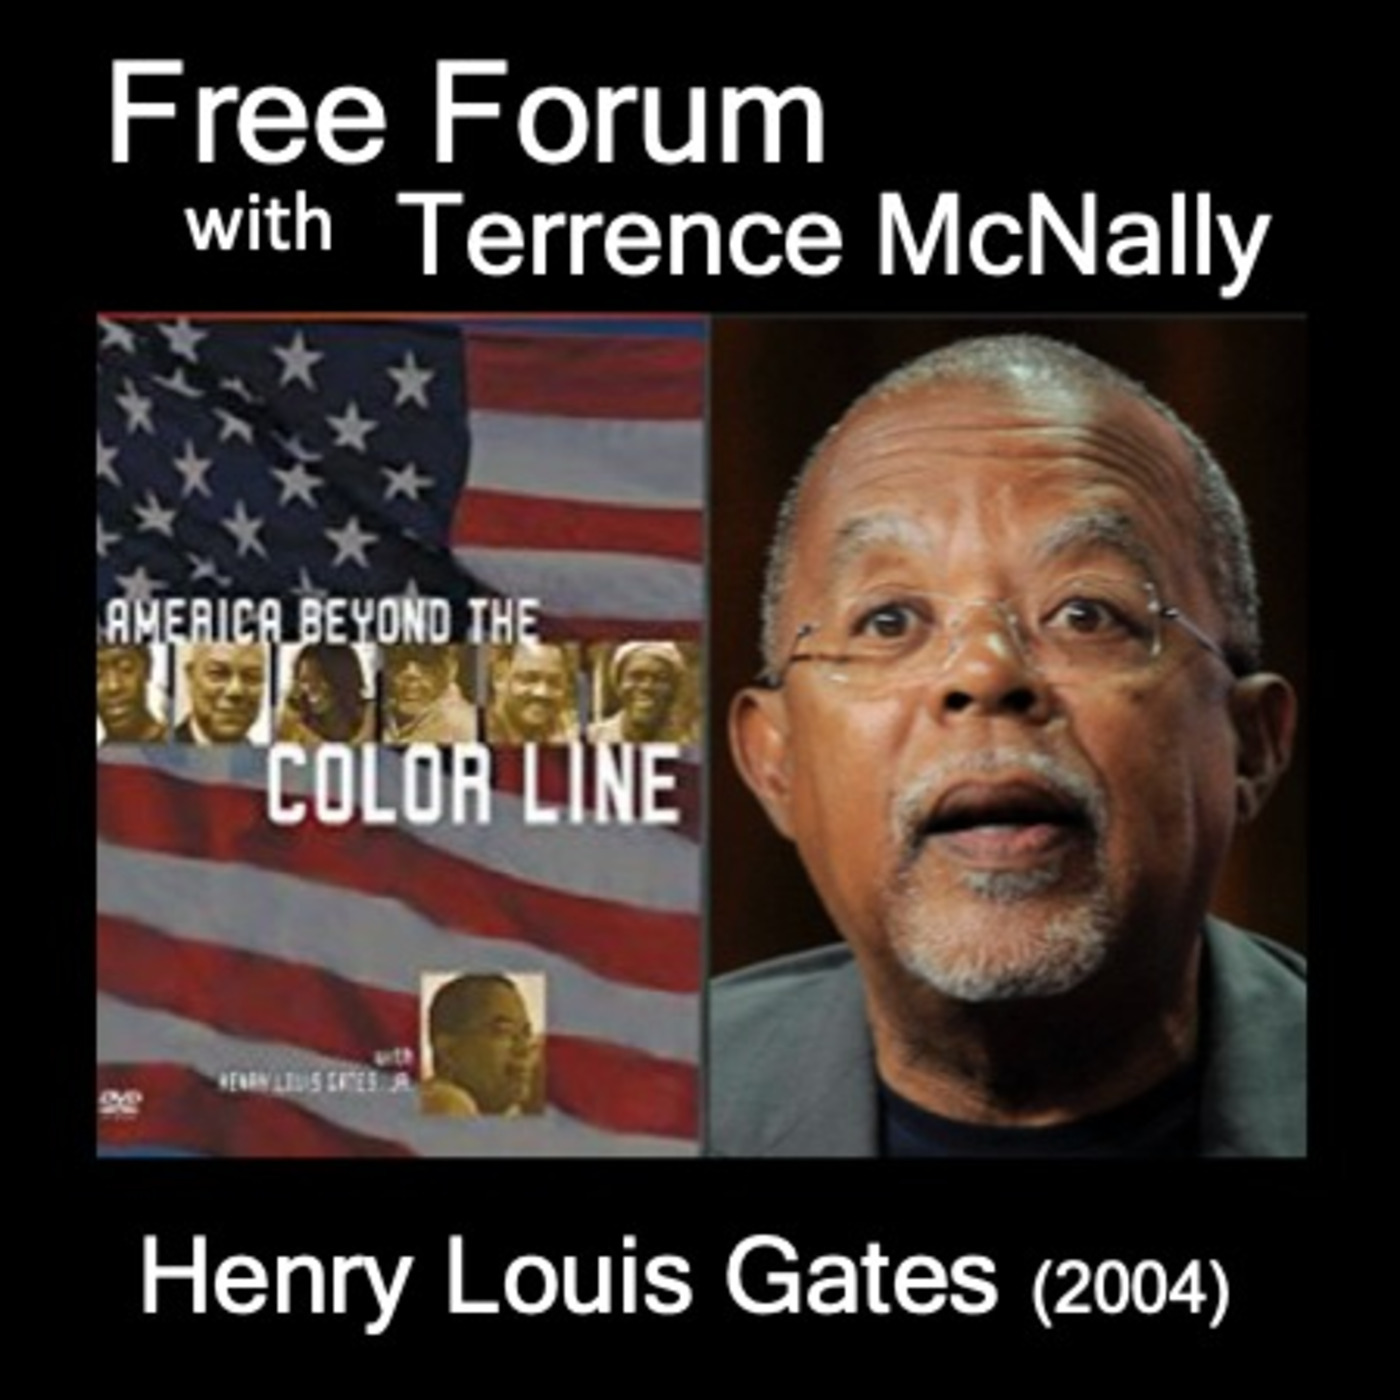 How did we get here? HENRY LOUIS GATES, America Behind the Color Line (2004)